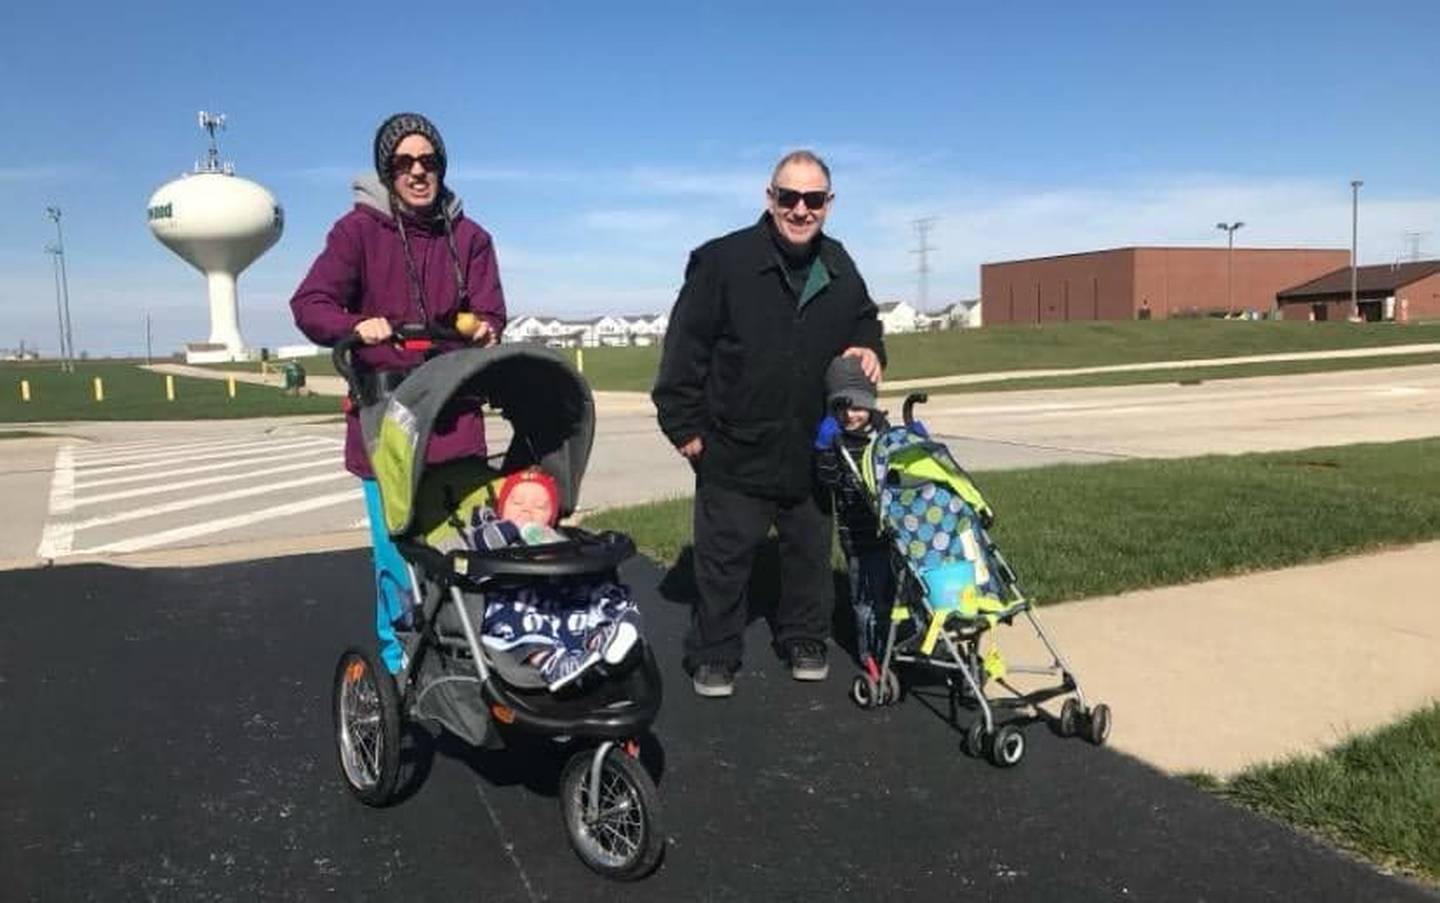 Timbers of Shorewood volunteer Joni Hilger loved to talk. Here, Joni and her husband Tom Hilger go out for a stroll with grandkids Blake and Kayden.